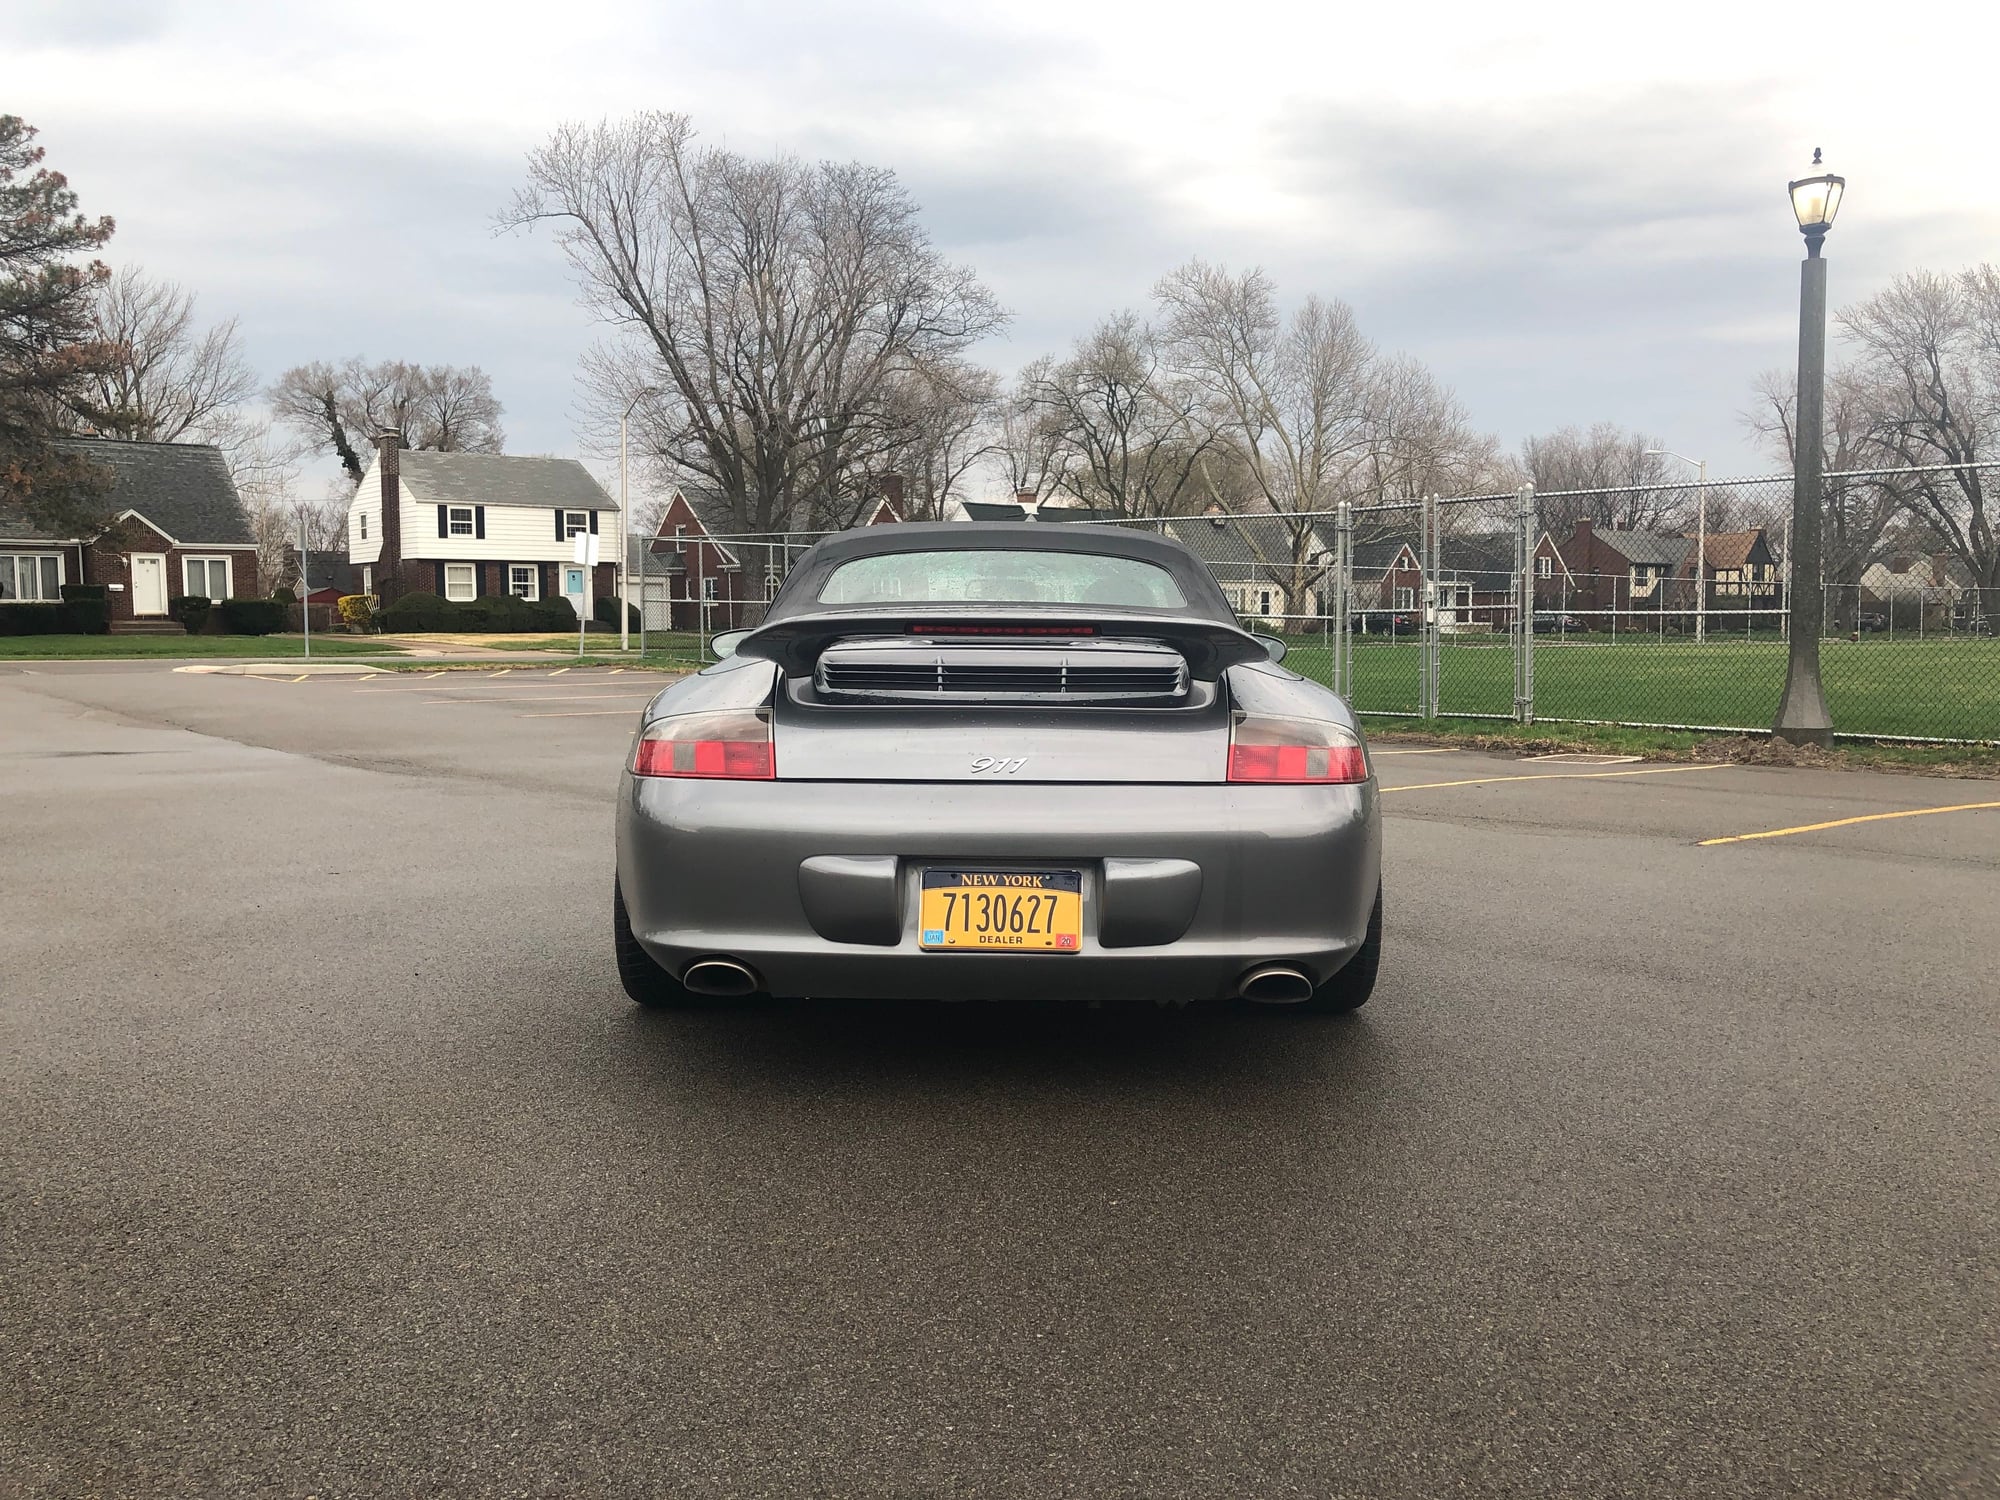 2002 Porsche 911 - 2002 Porsche 911 Cabriolet 996.2 - Used - VIN WP0CA29912S652236 - 115,000 Miles - 6 cyl - 2WD - Manual - Convertible - Gray - Buffalo, NY 14223, United States